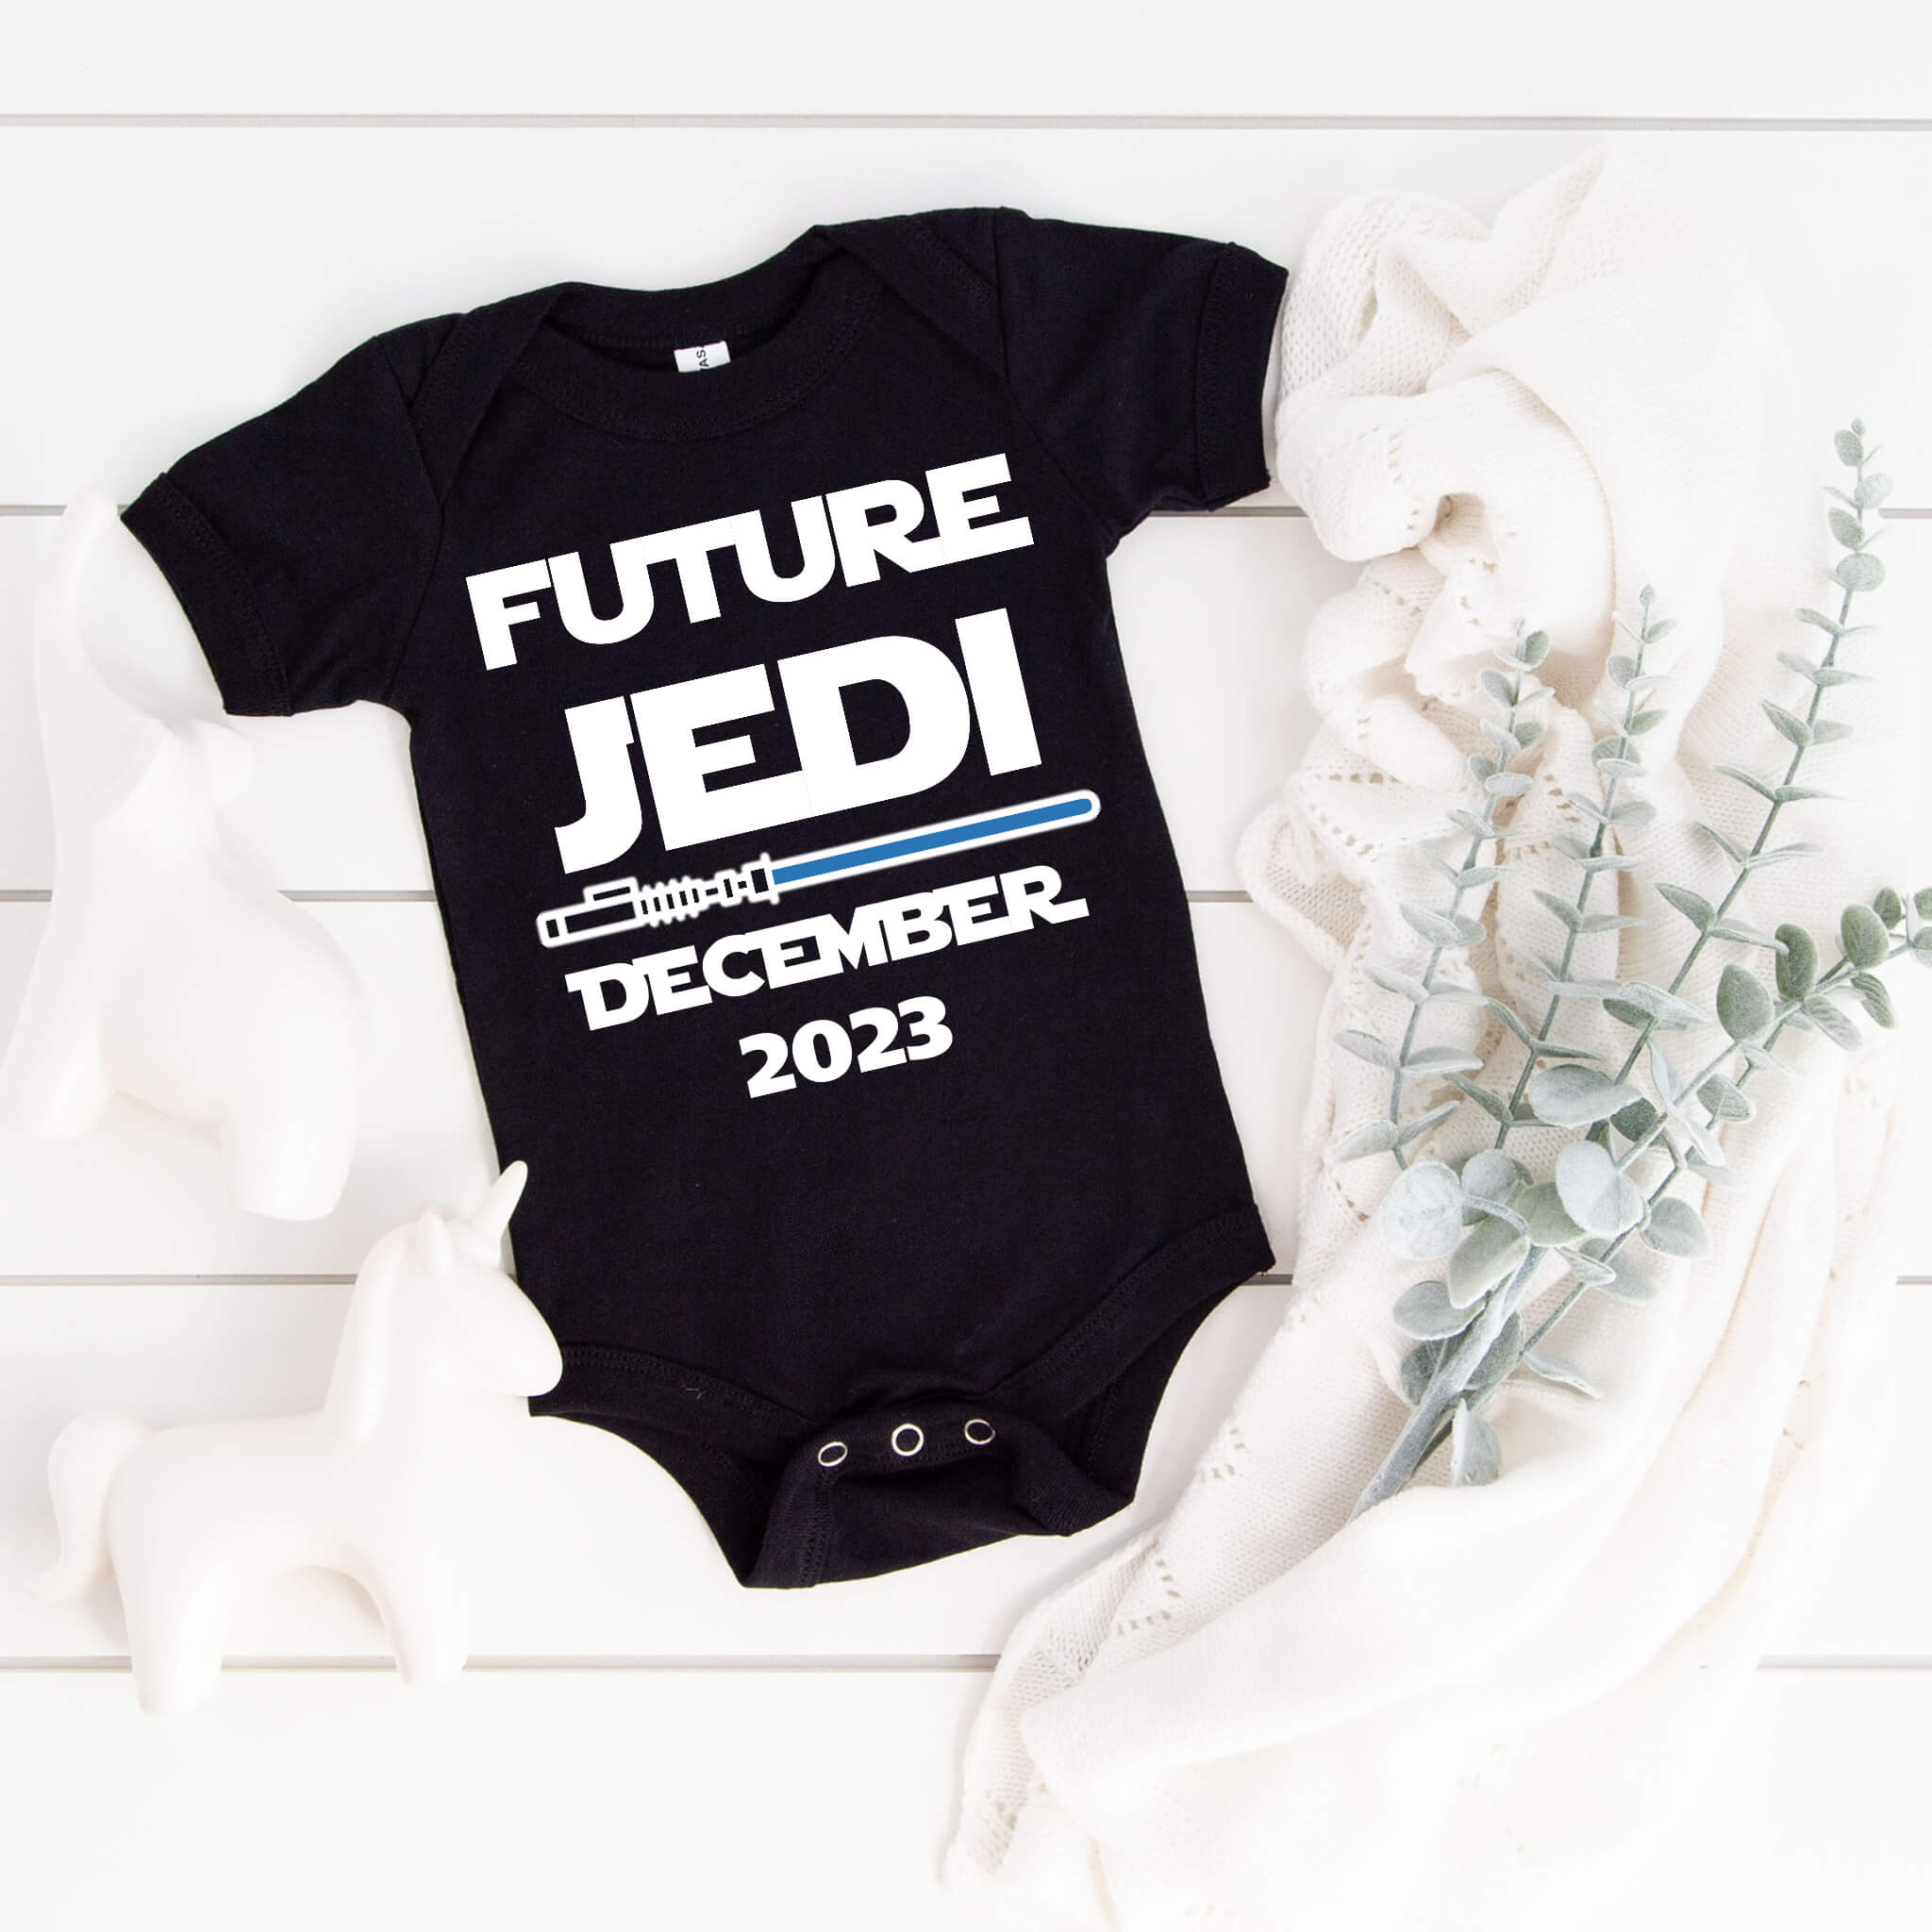 Personalized Pregnancy Announcement, Future Jedi Coming, Dad, Grandma, Grandpa, Aunt, Uncle To Be, Customized Baby Announcement Onesie, Social Media Announcement, Gift Box Baby Announcement, Animated Movie Characters Pregnancy Announcement